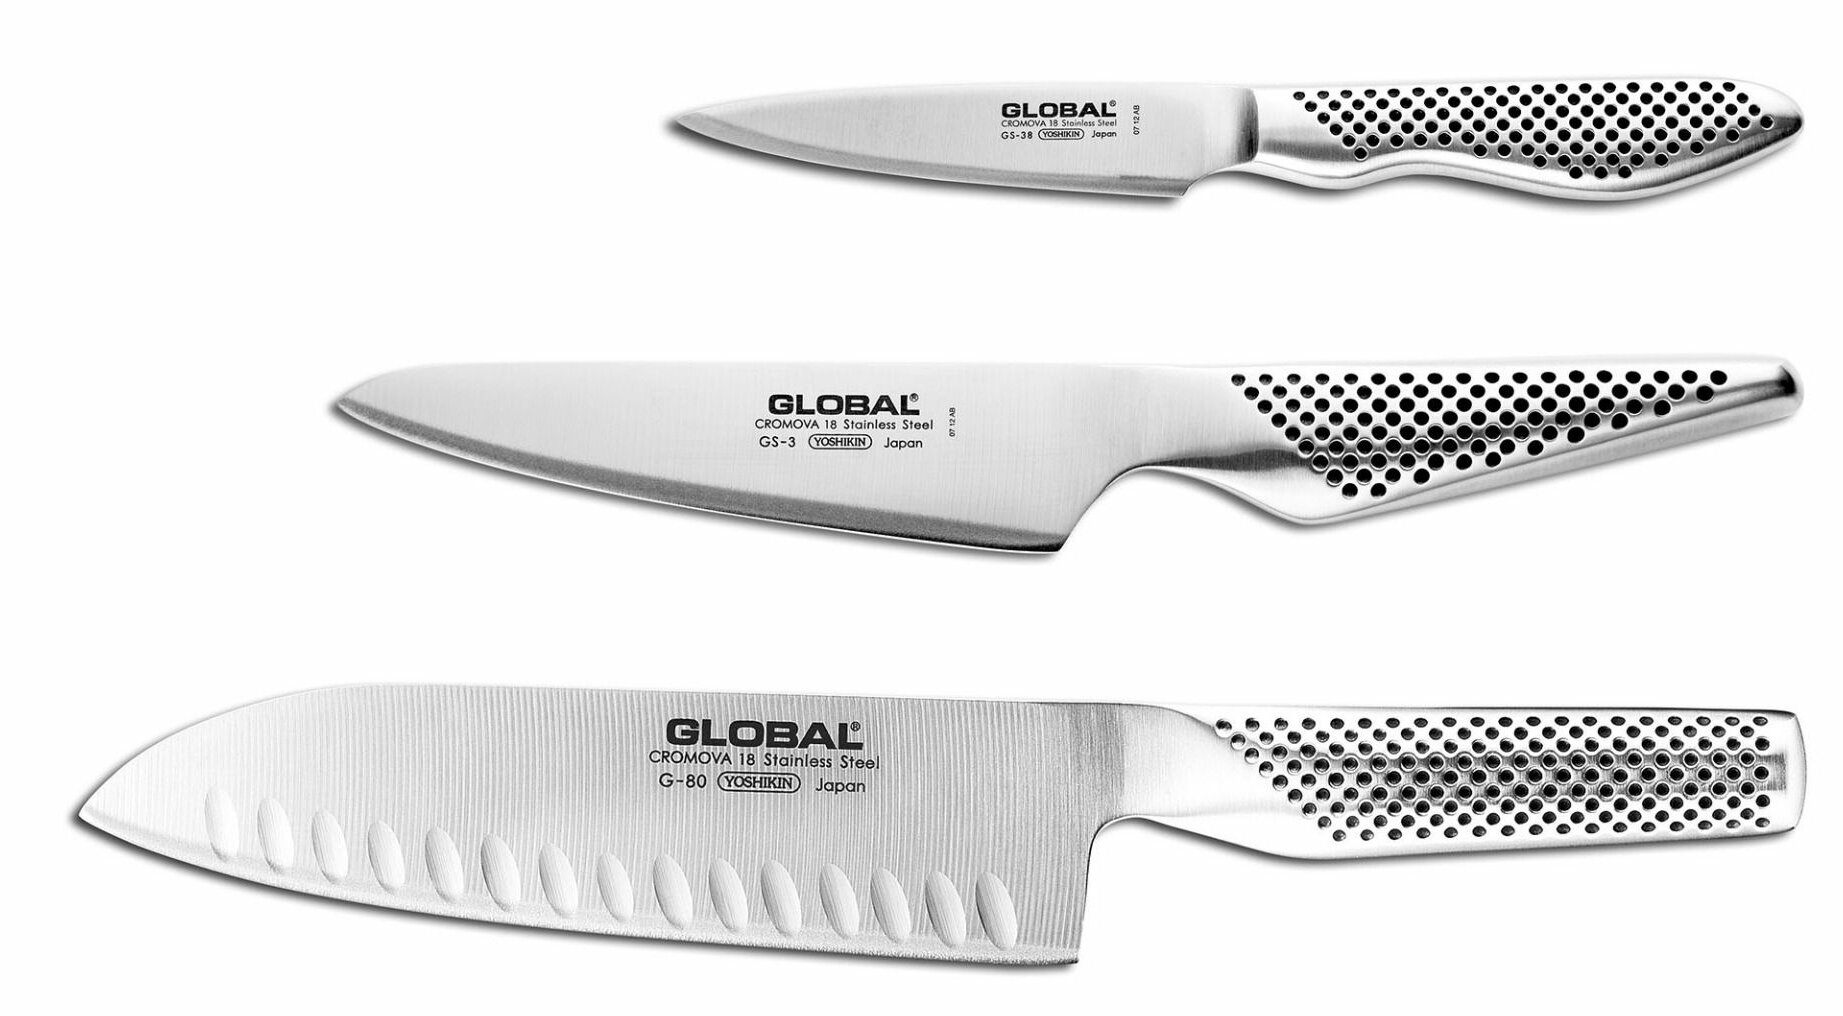 Global Classic Knife Collection